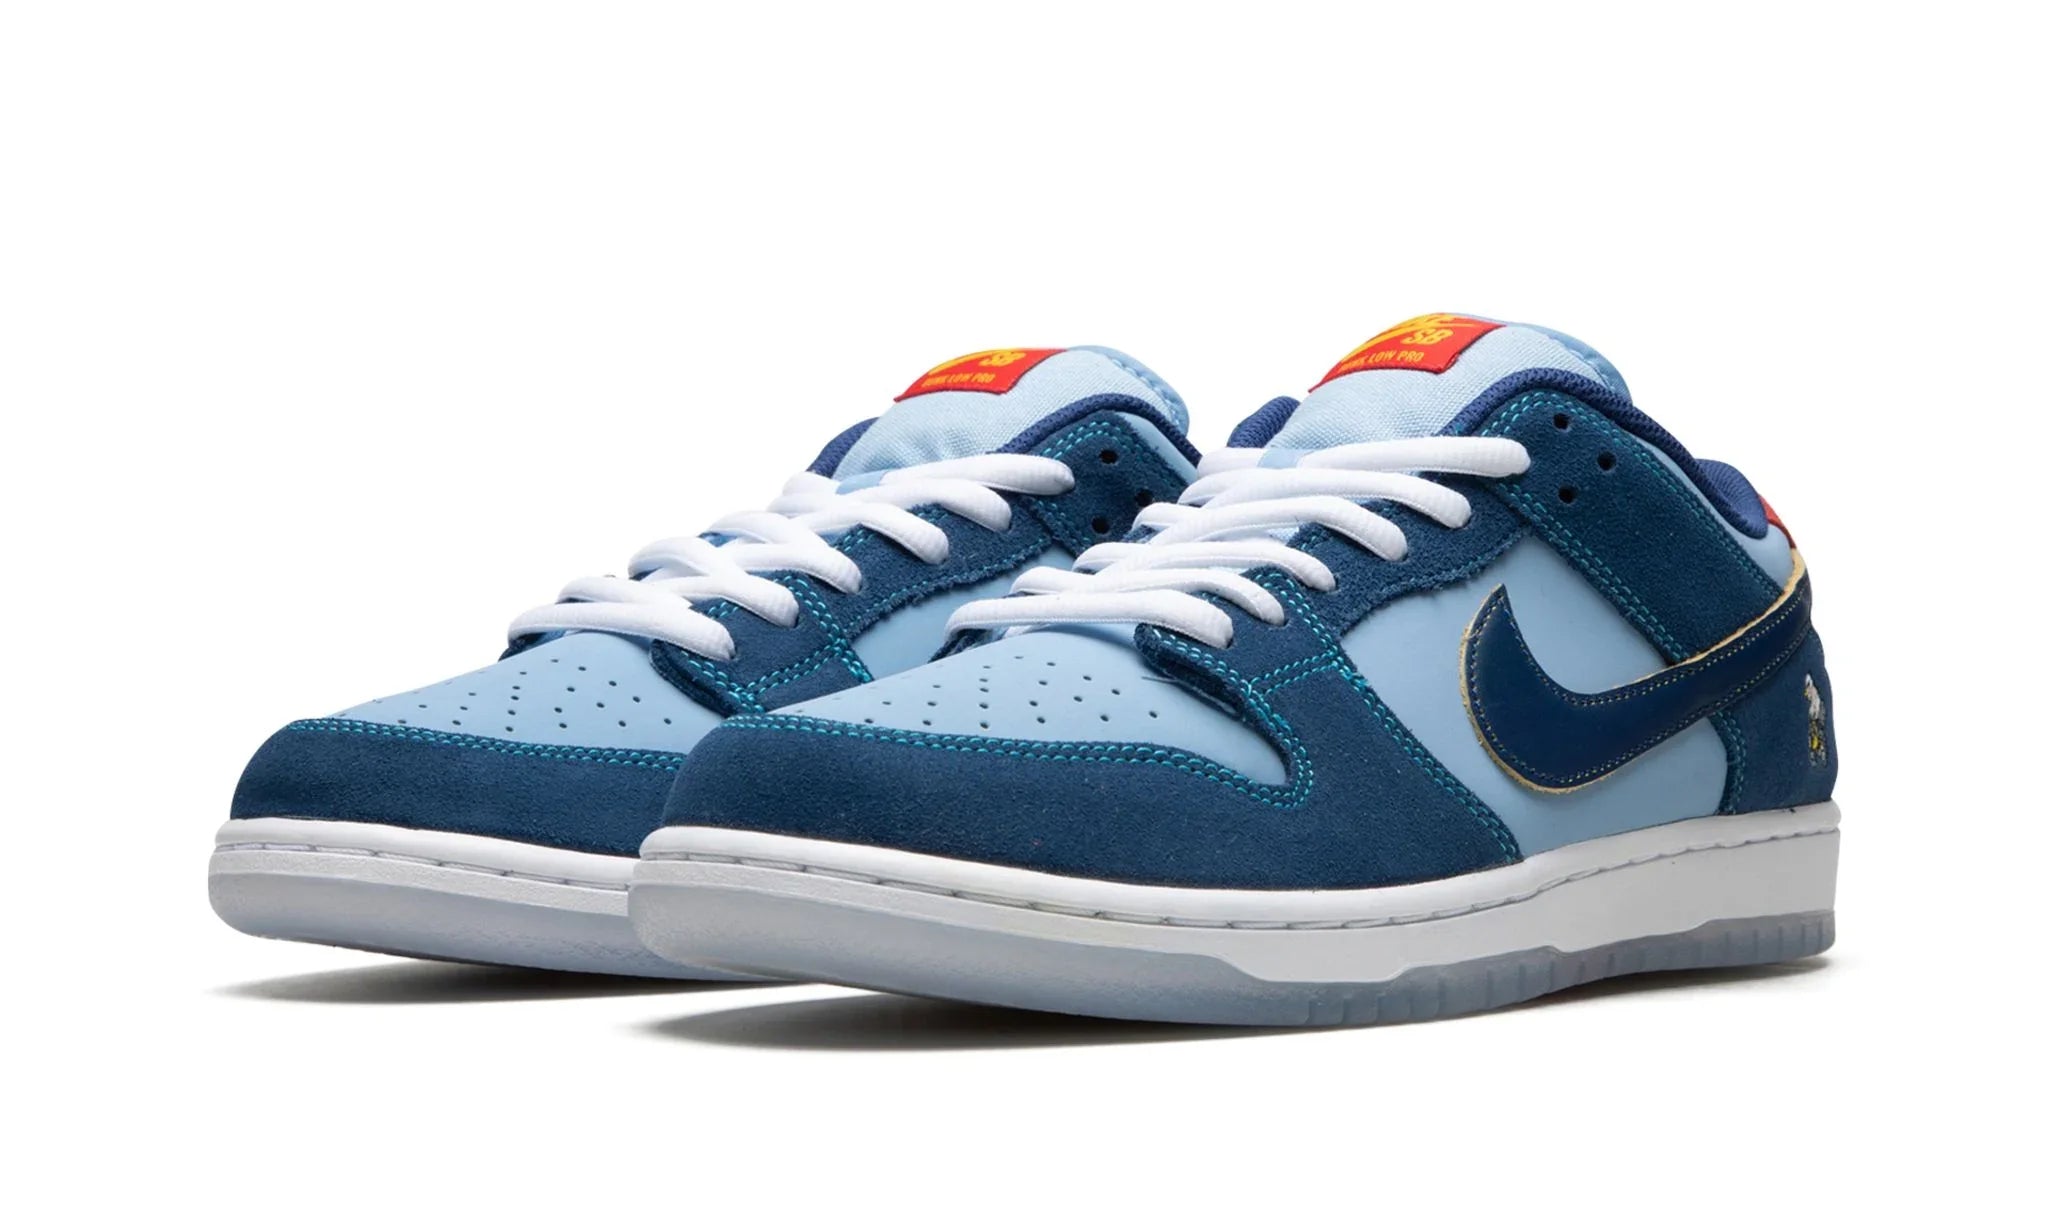 Nike Dunk Low SB PRM "Why So Sad ?" - DX5549-400 - Sneakers